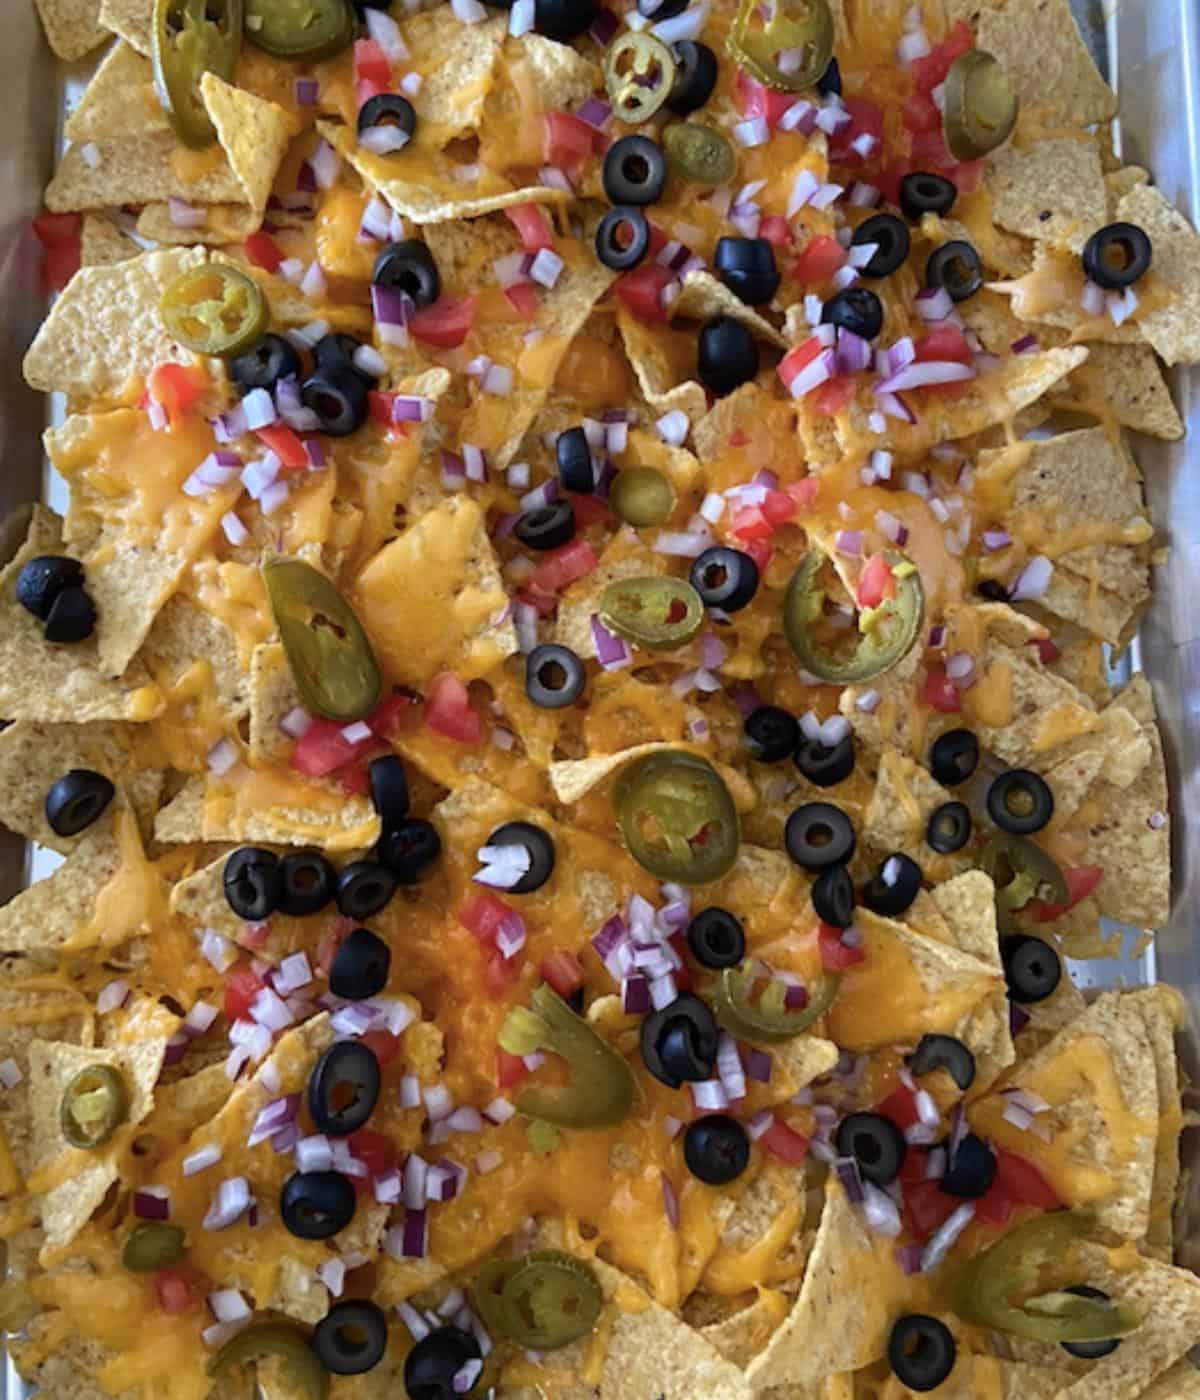 Cheesy nachos topped with veggies after coming out of the oven.